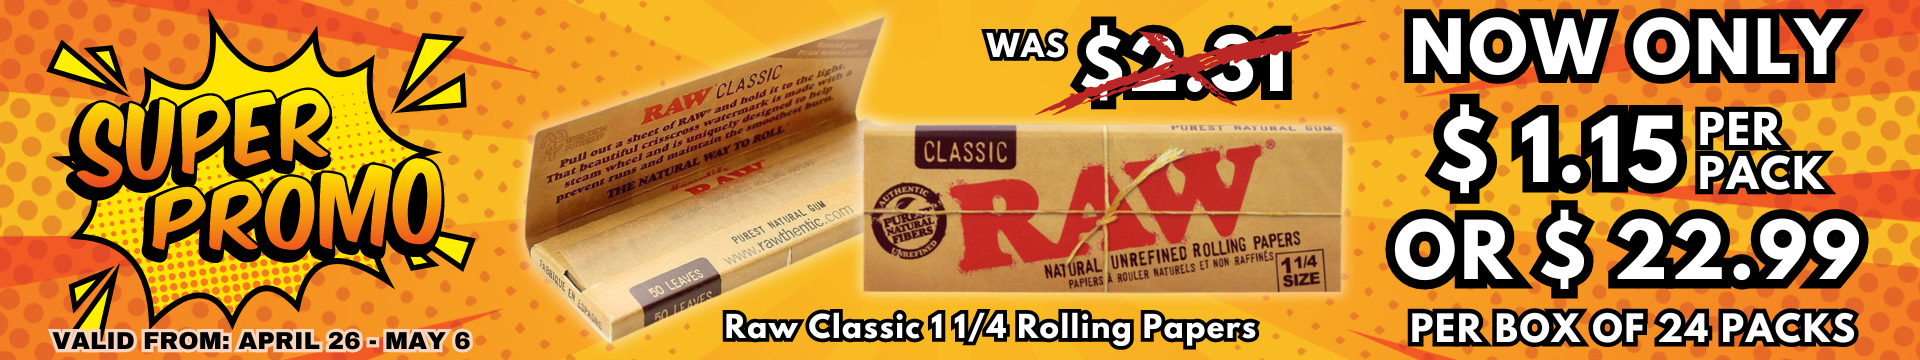 Raw rolling papers 1 1/4 size classic. Limited time promotion